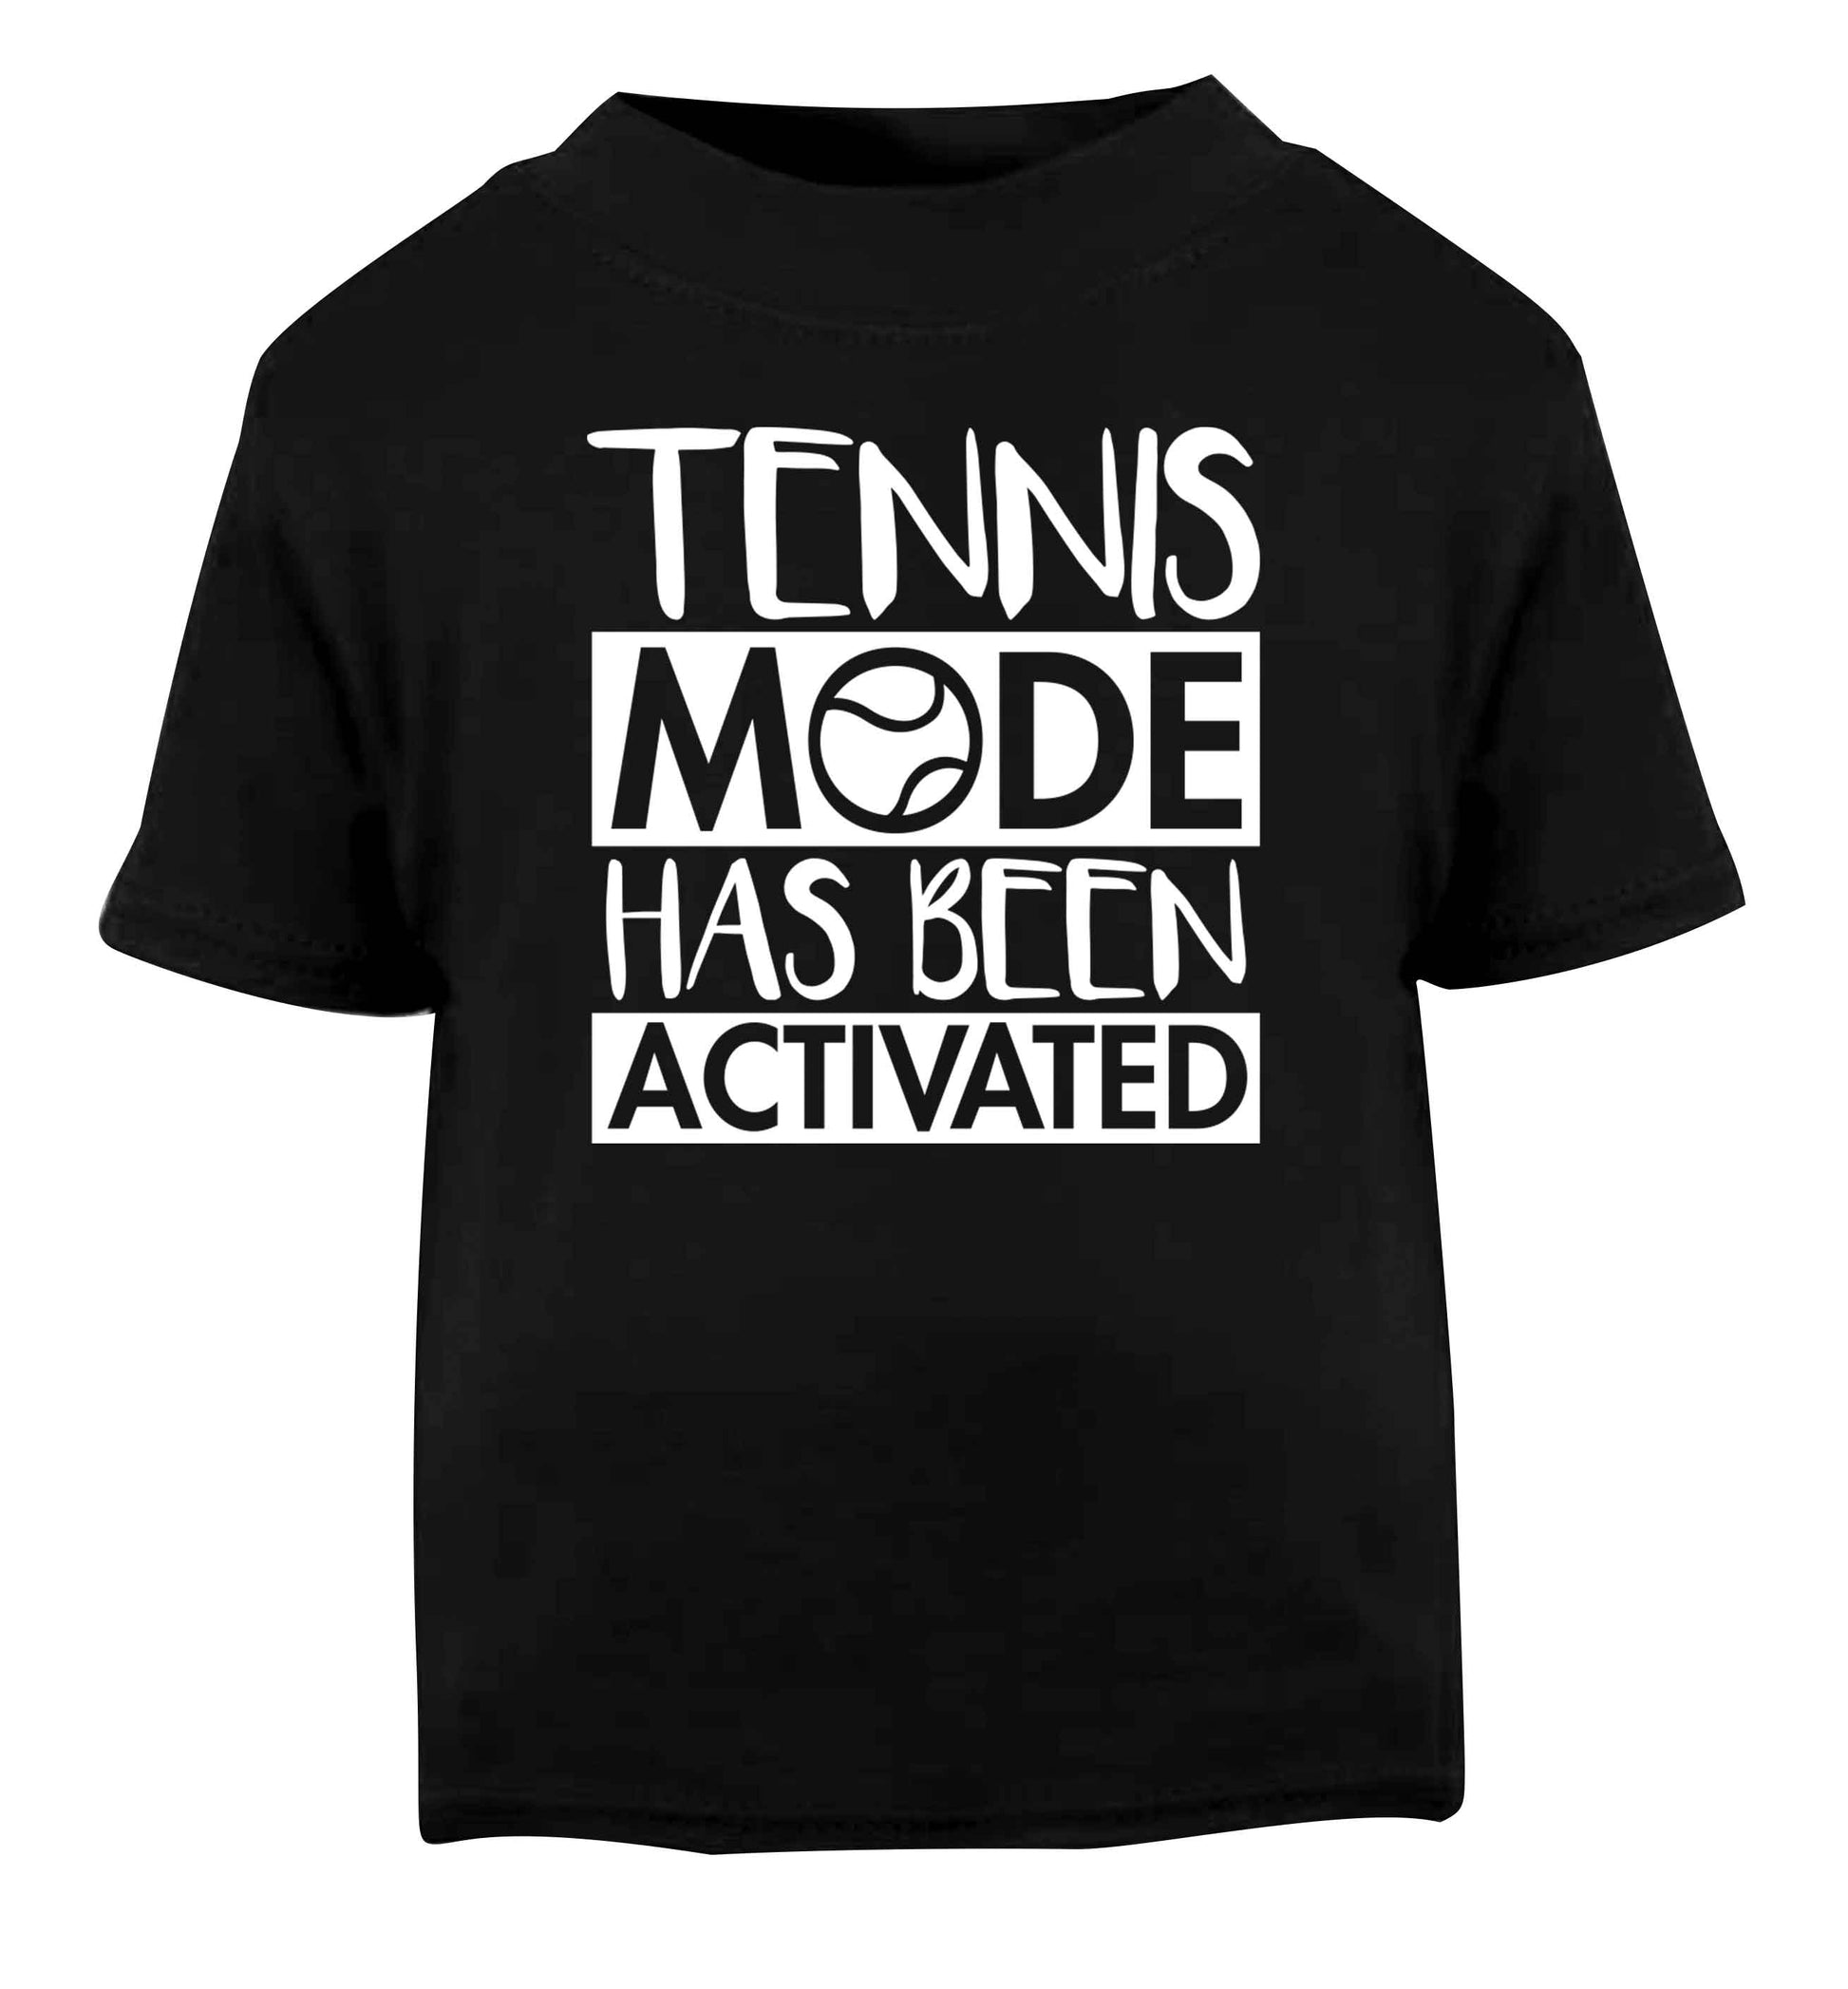 Tennis mode has been activated Black Baby Toddler Tshirt 2 years